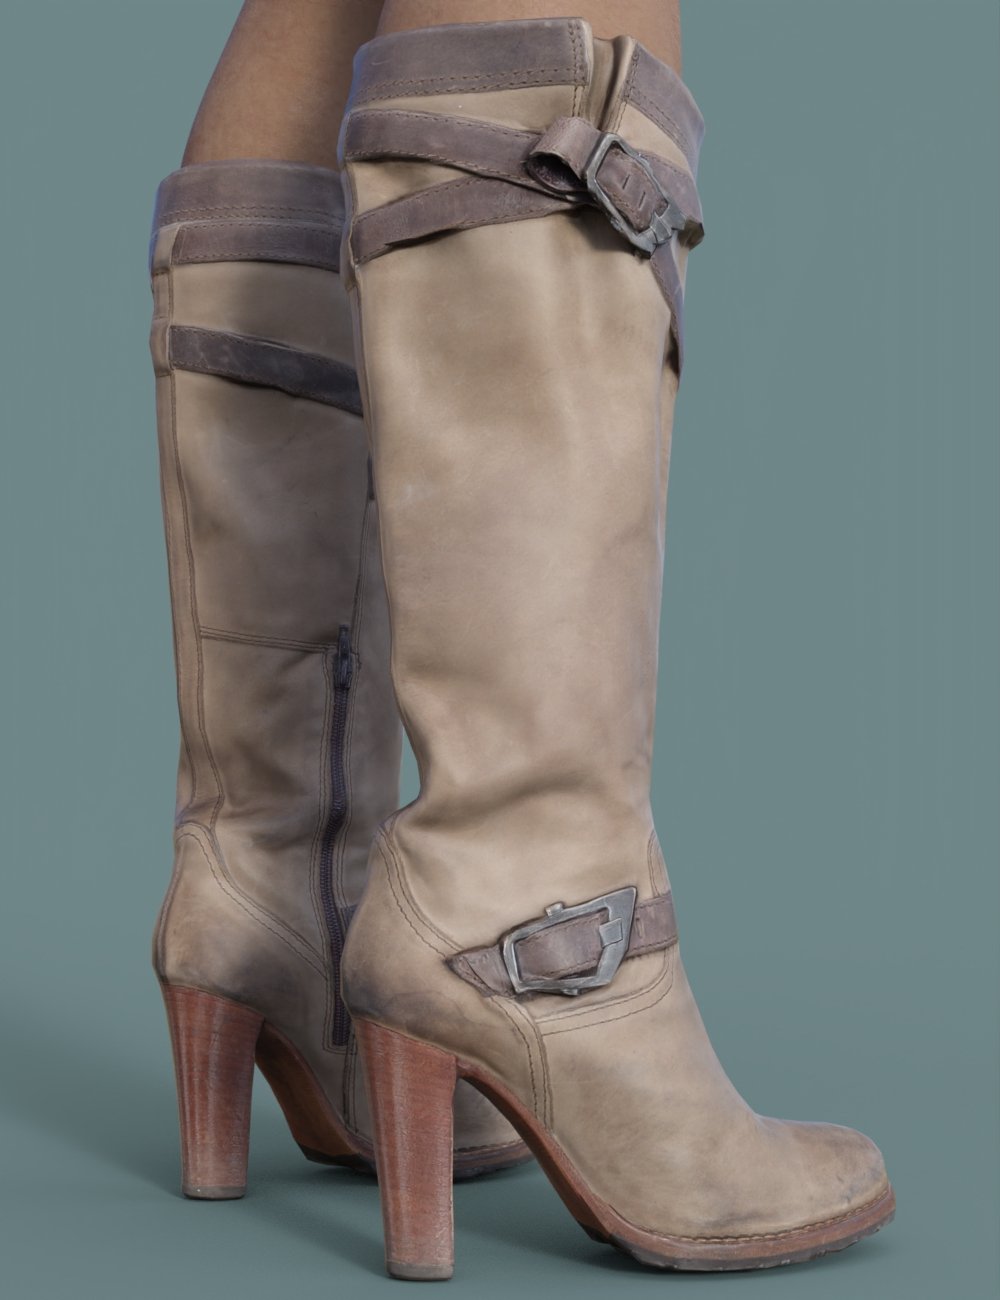 Walking Boots for Genesis 8.1 Females